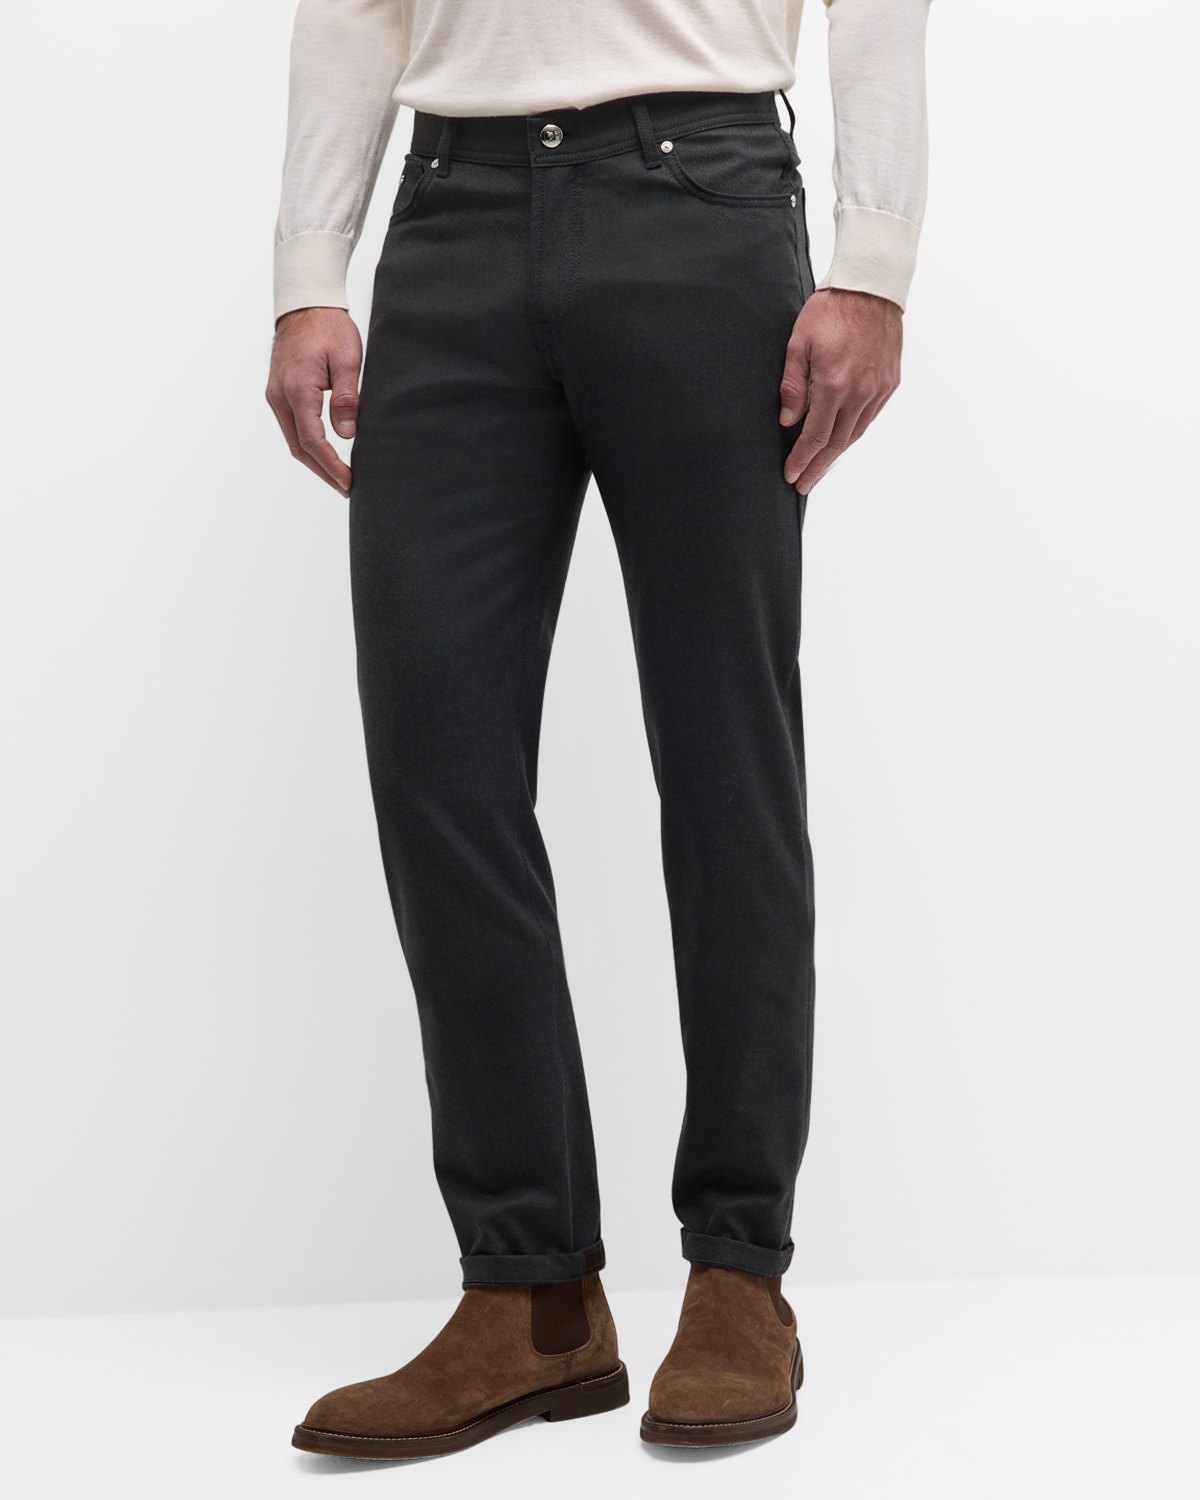 Men's Magnifico Luxe Worsted Flannel Pants